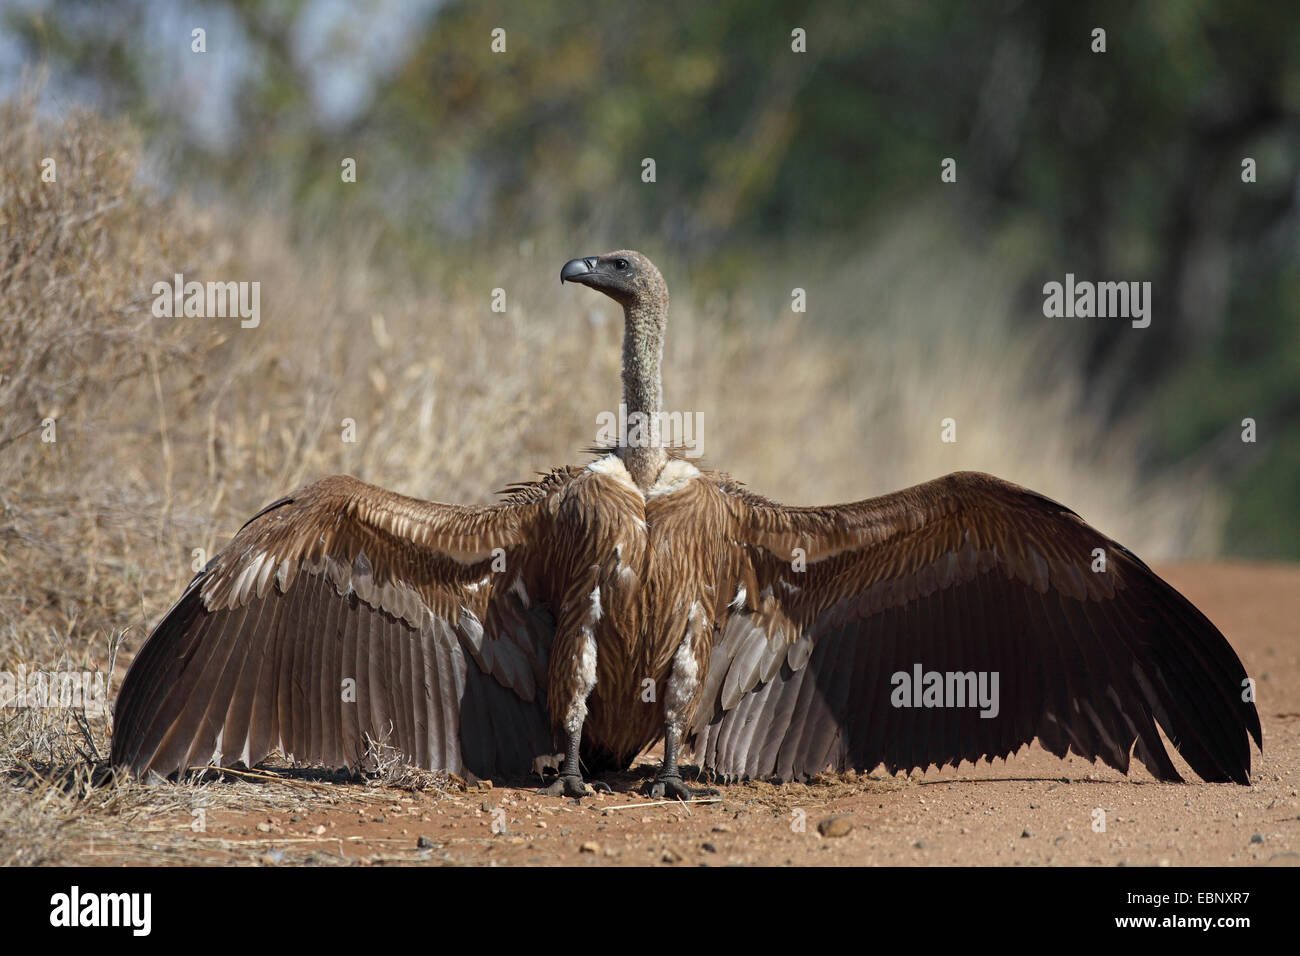 African white-backed vulture (Gyps africanus), standing on the ground with outstretched wings, South Africa, Kruger National Park Stock Photo